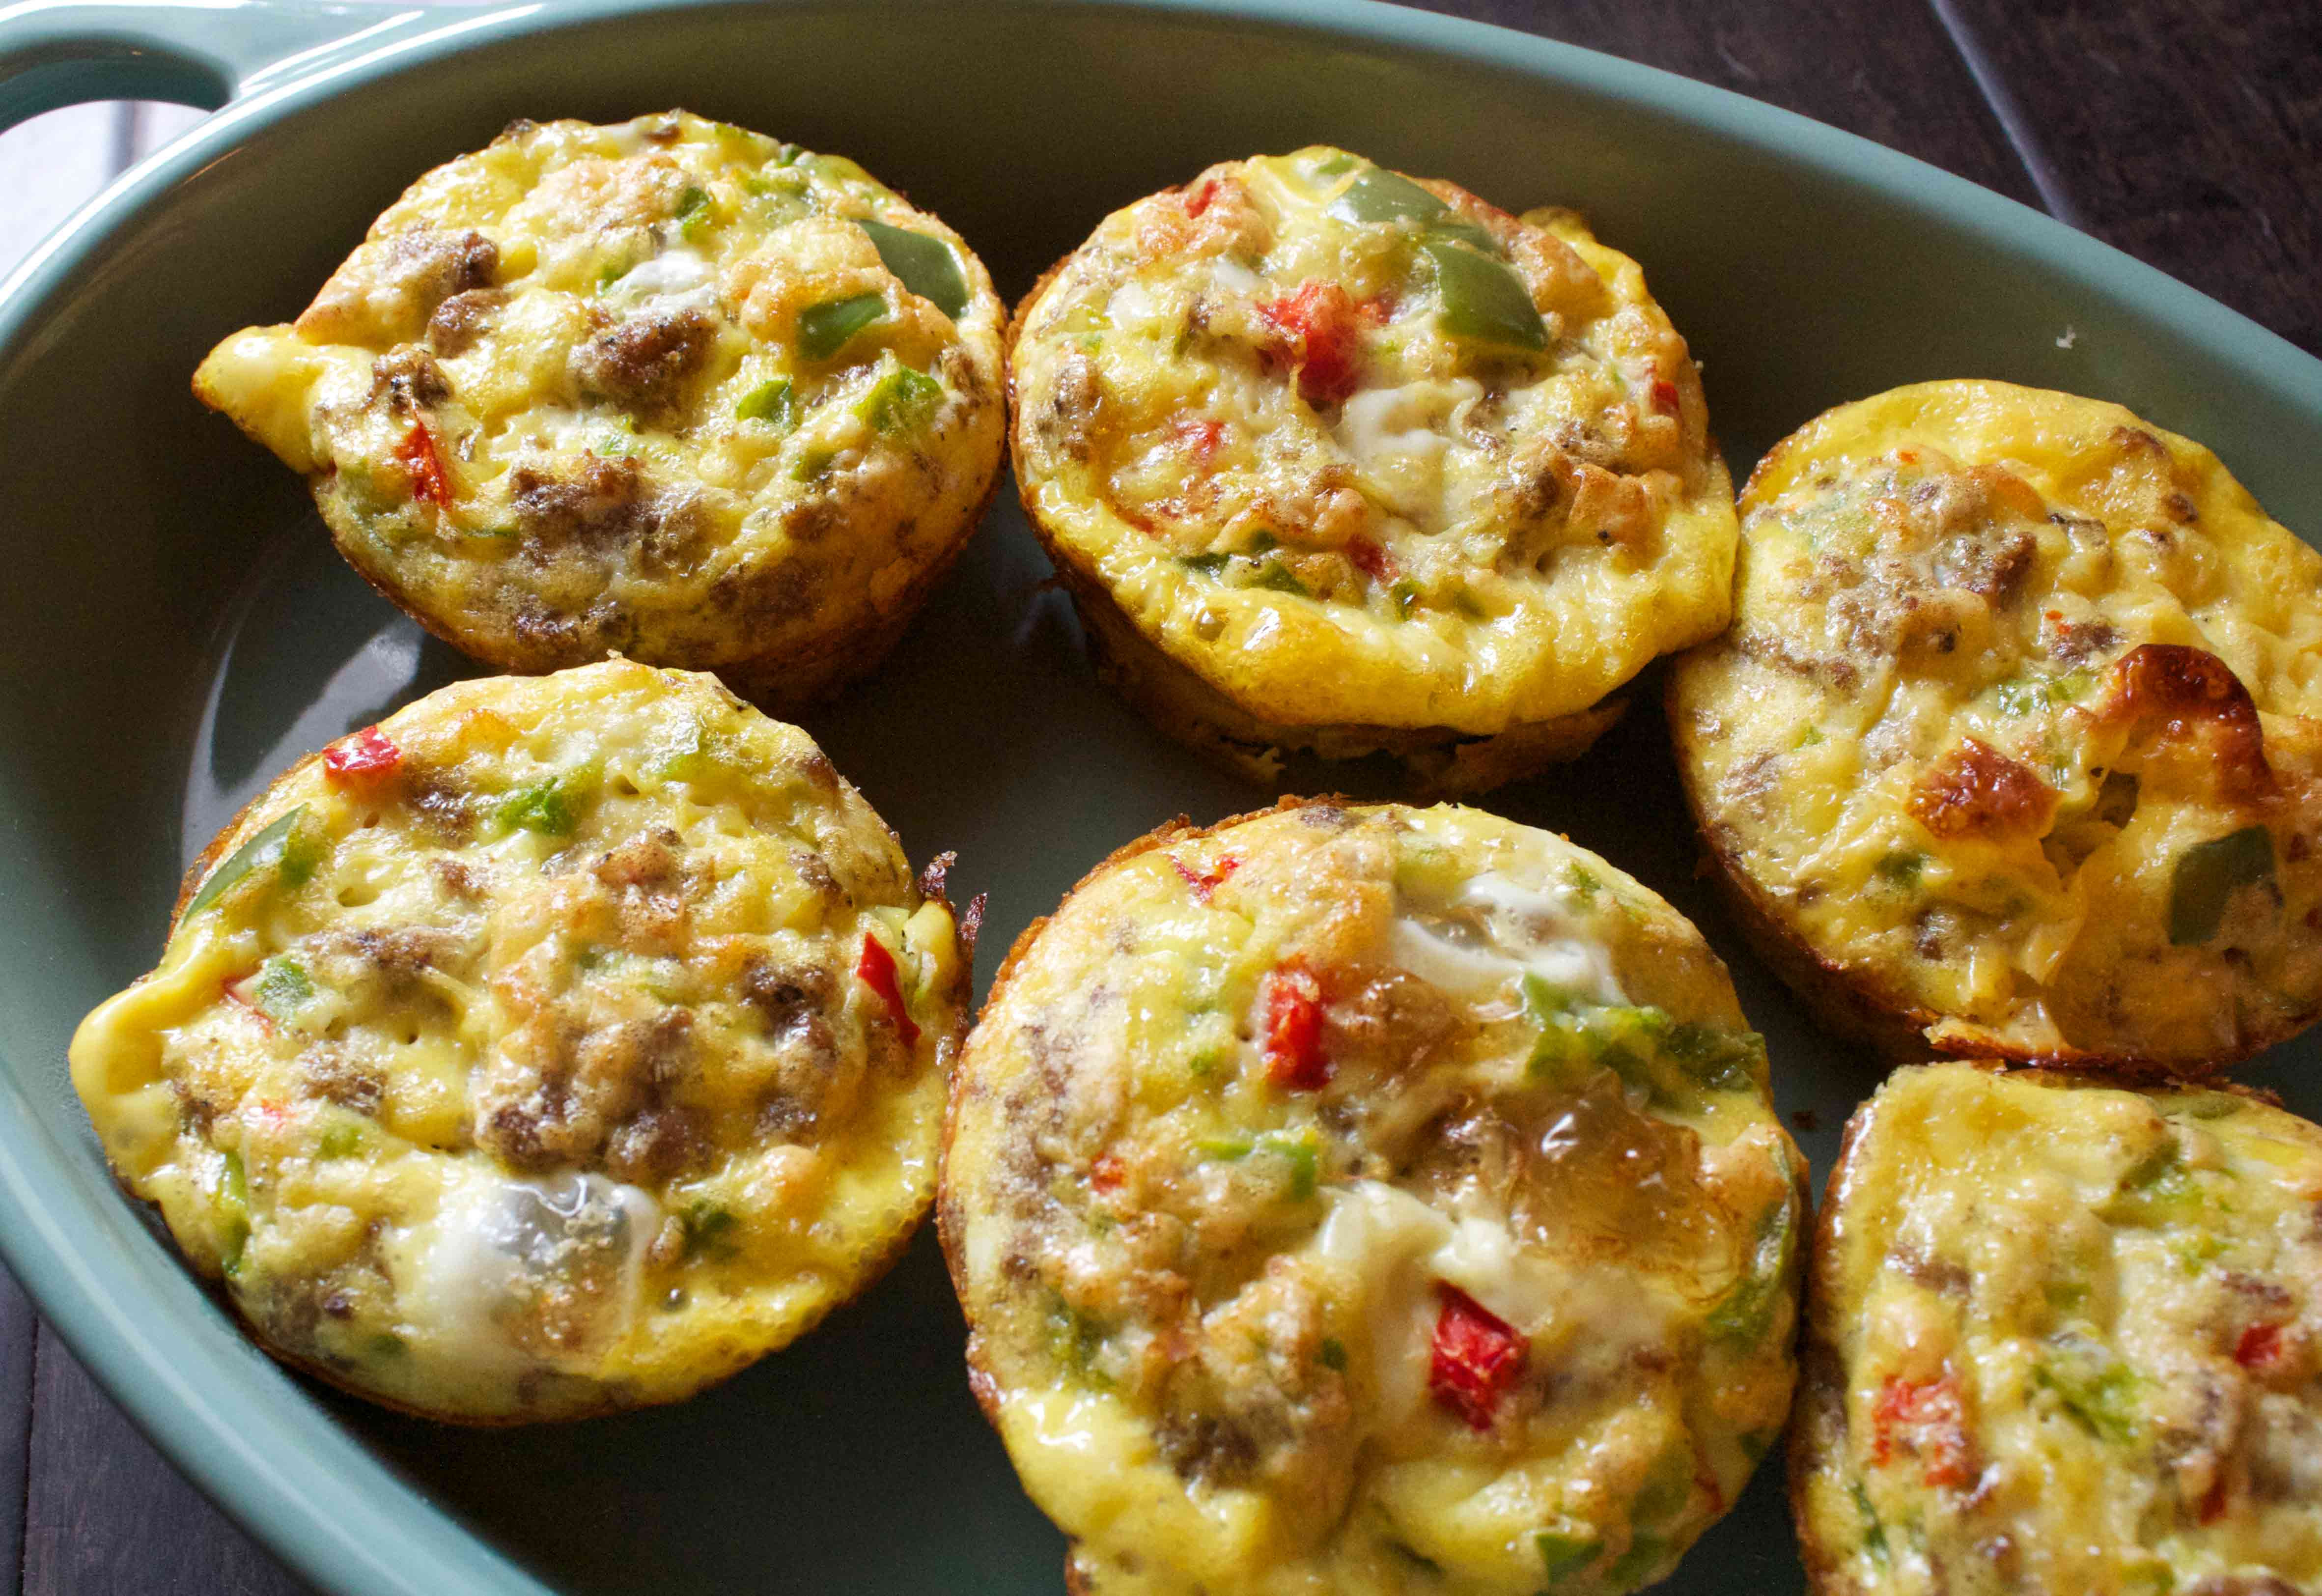 Turkey Sausage Recipes Low Carb
 Turkey Sausage & Bell Pepper Egg Cups